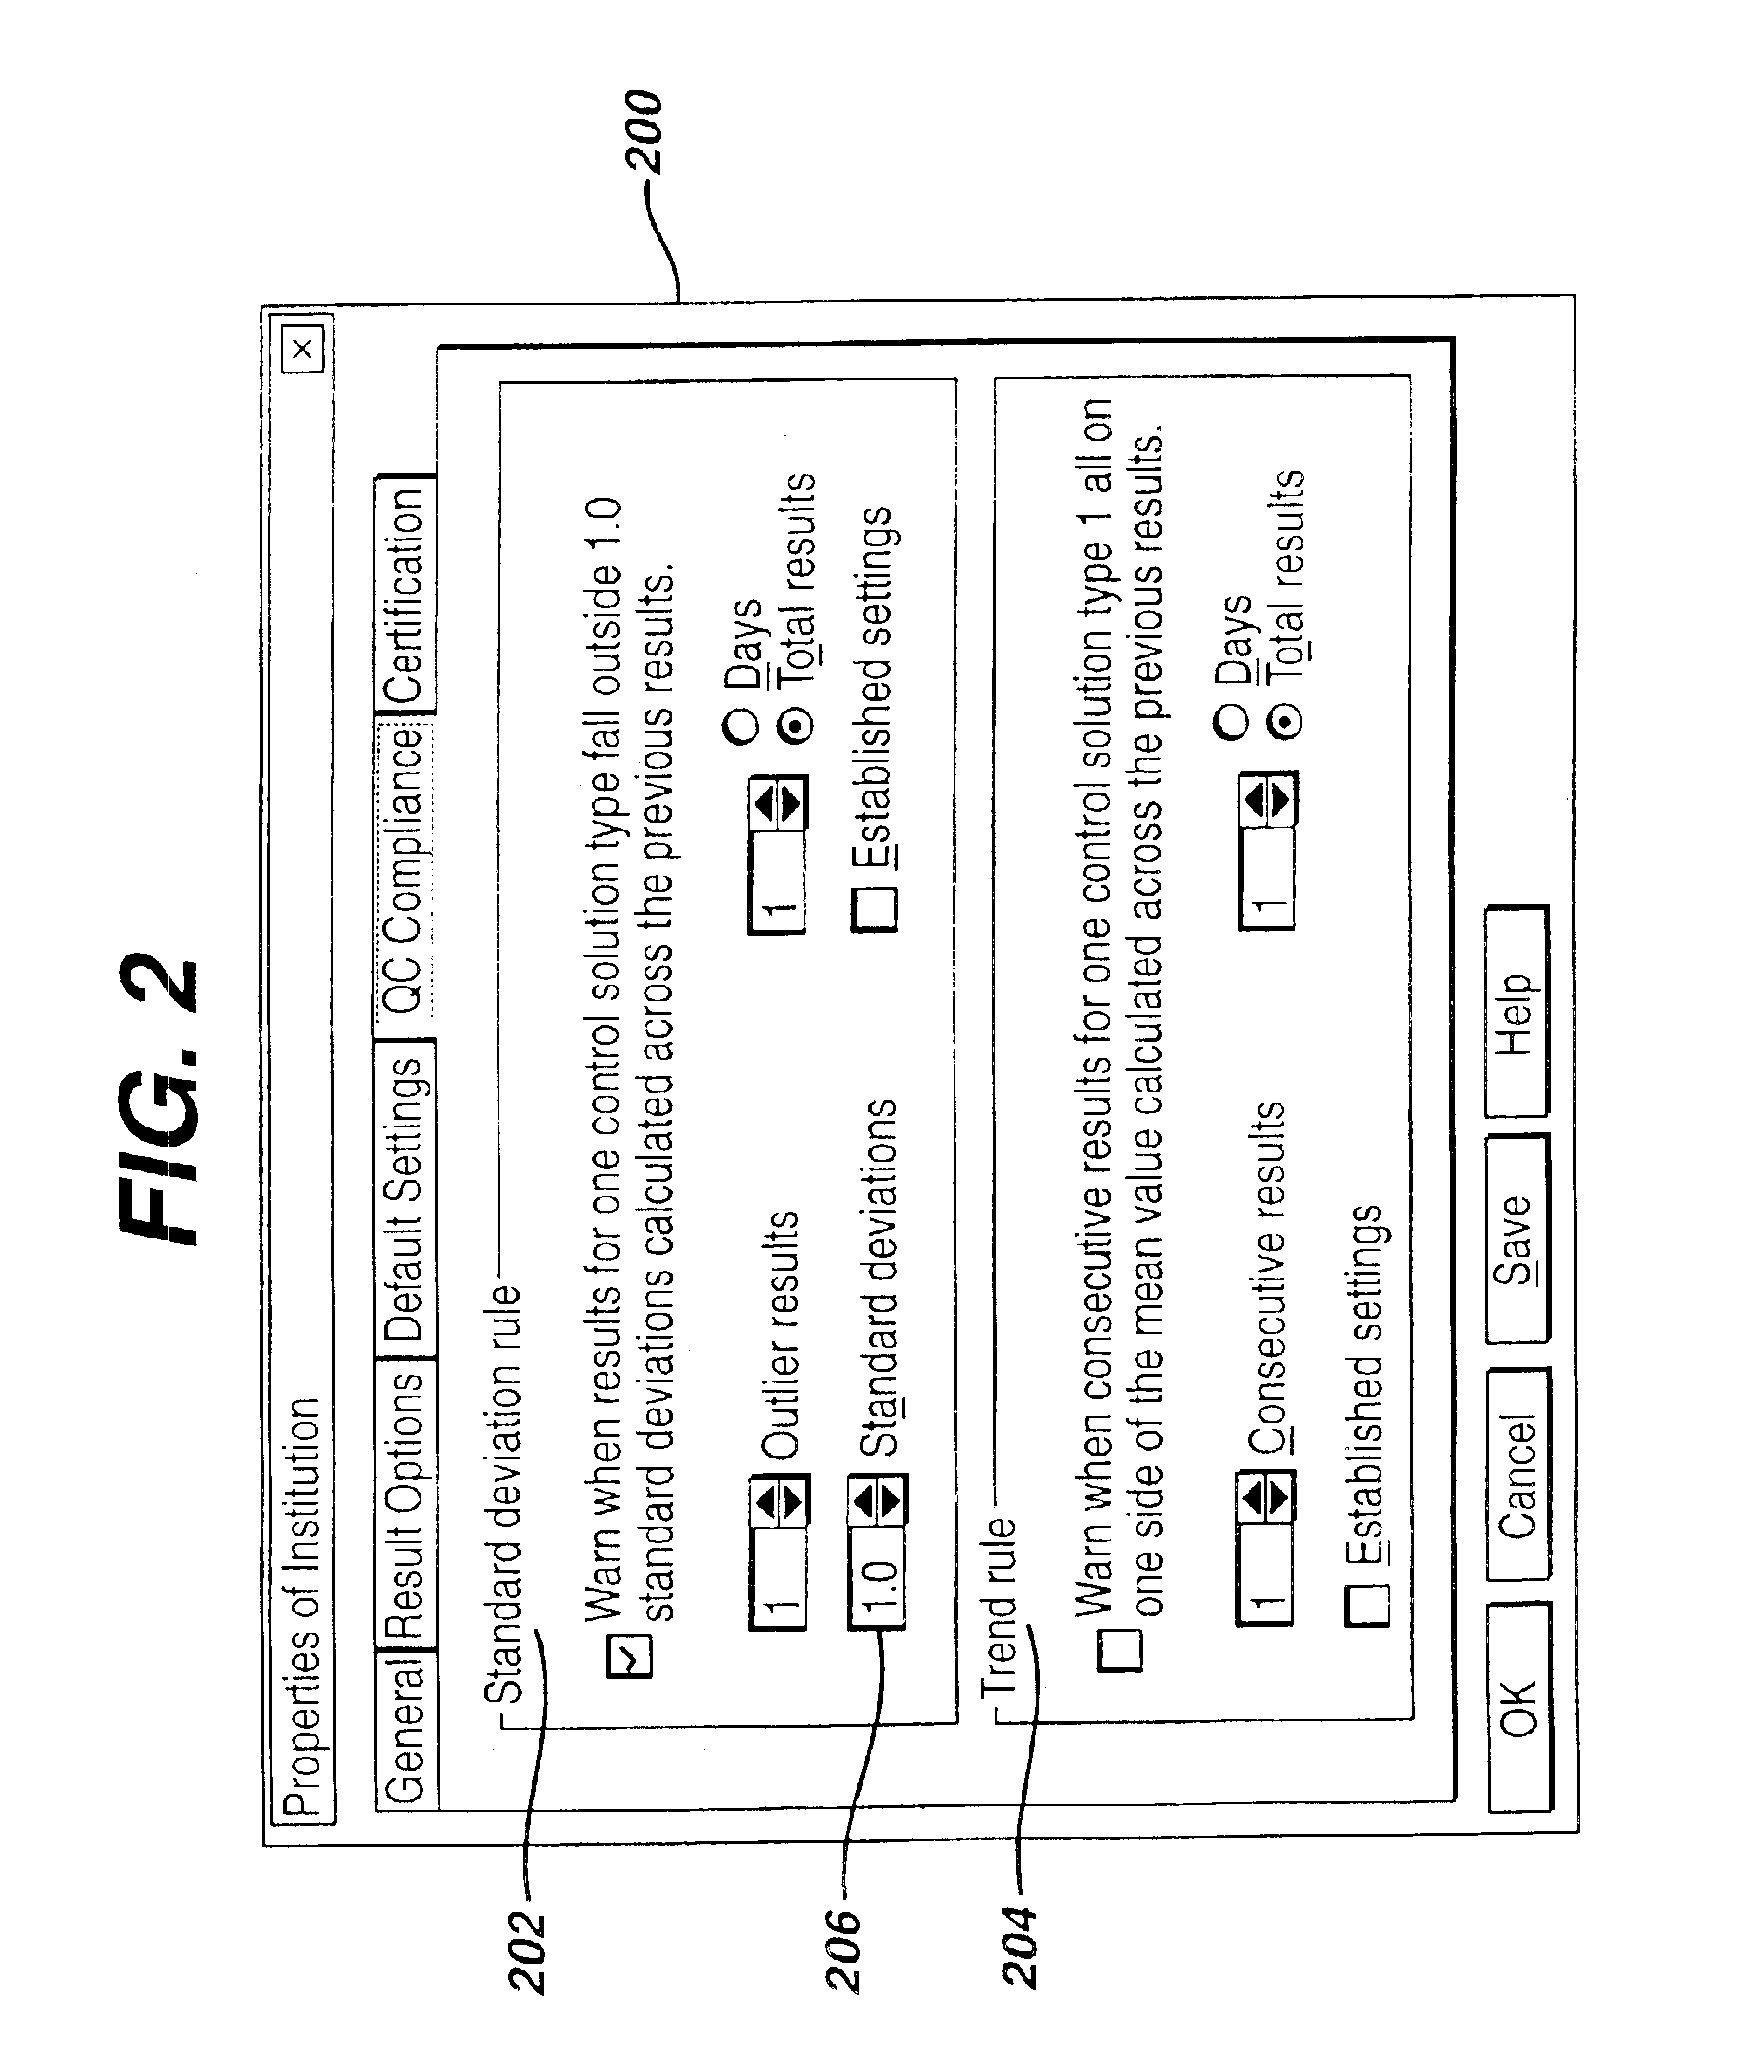 Method for automated exception-based quality control compliance for point-of-care devices